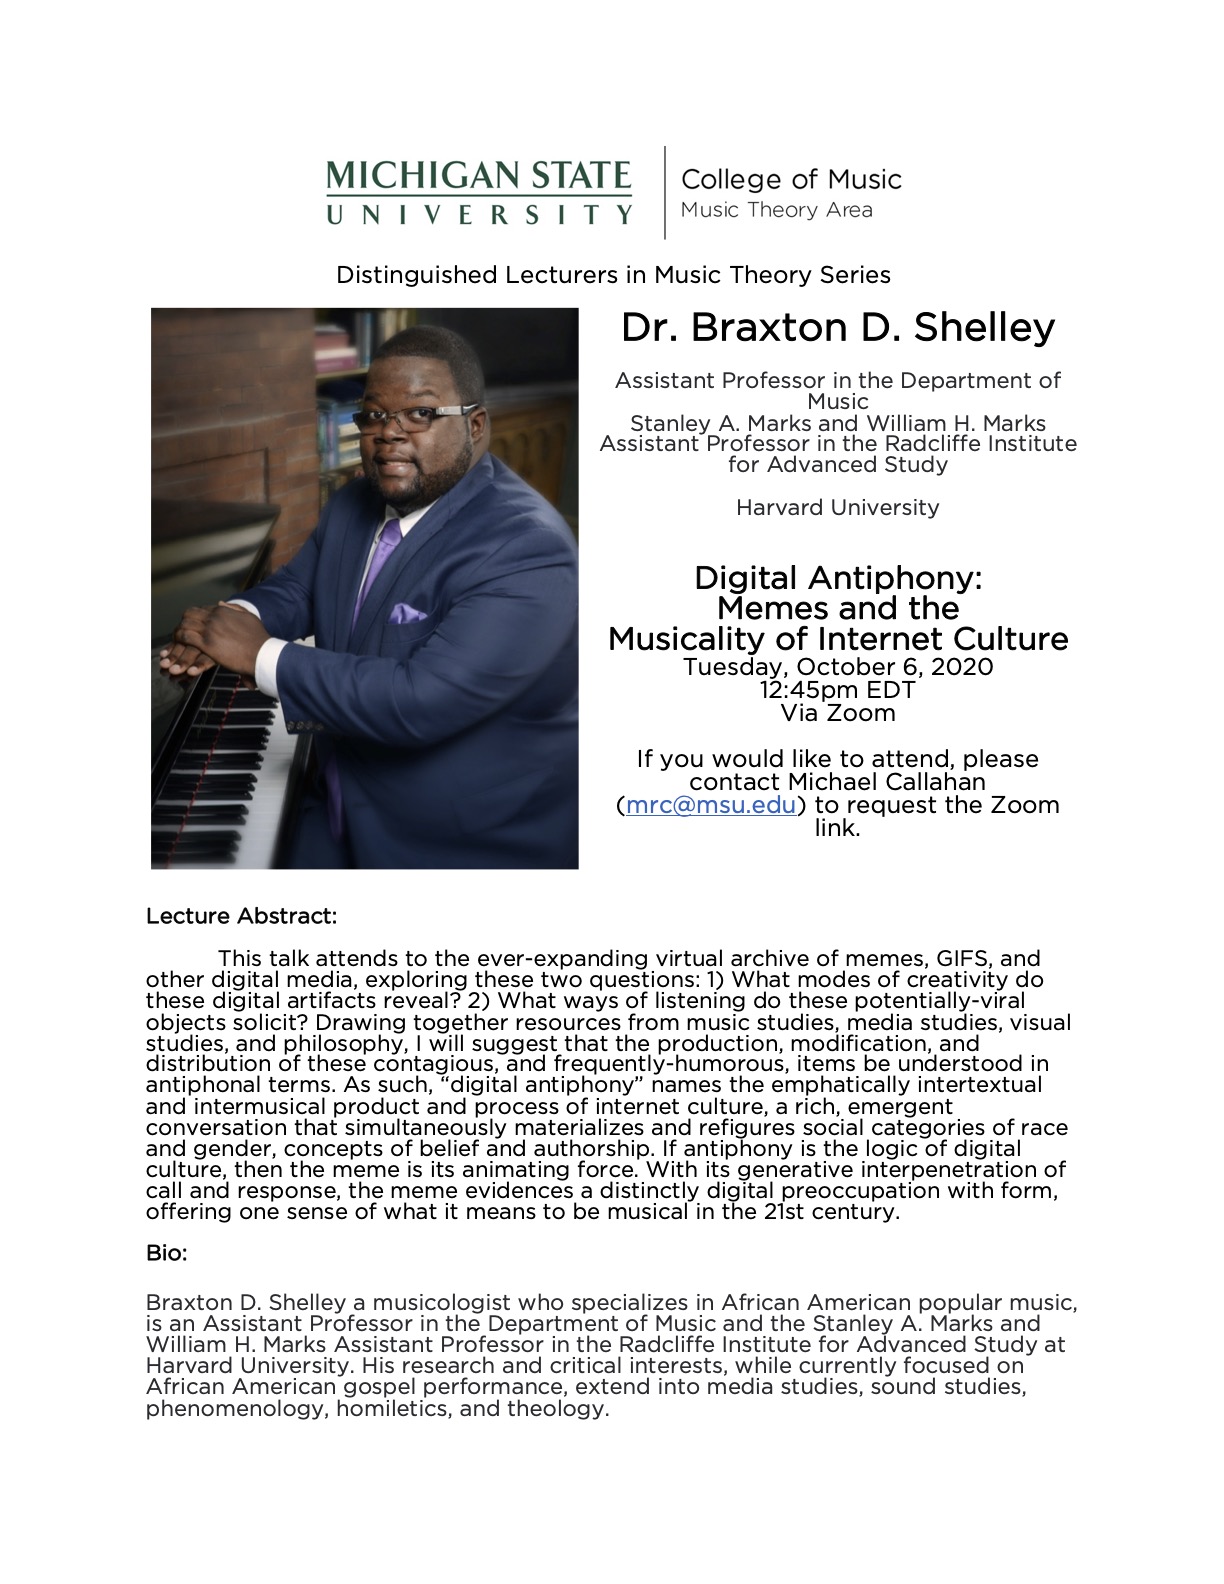 Shelley lecture flyer